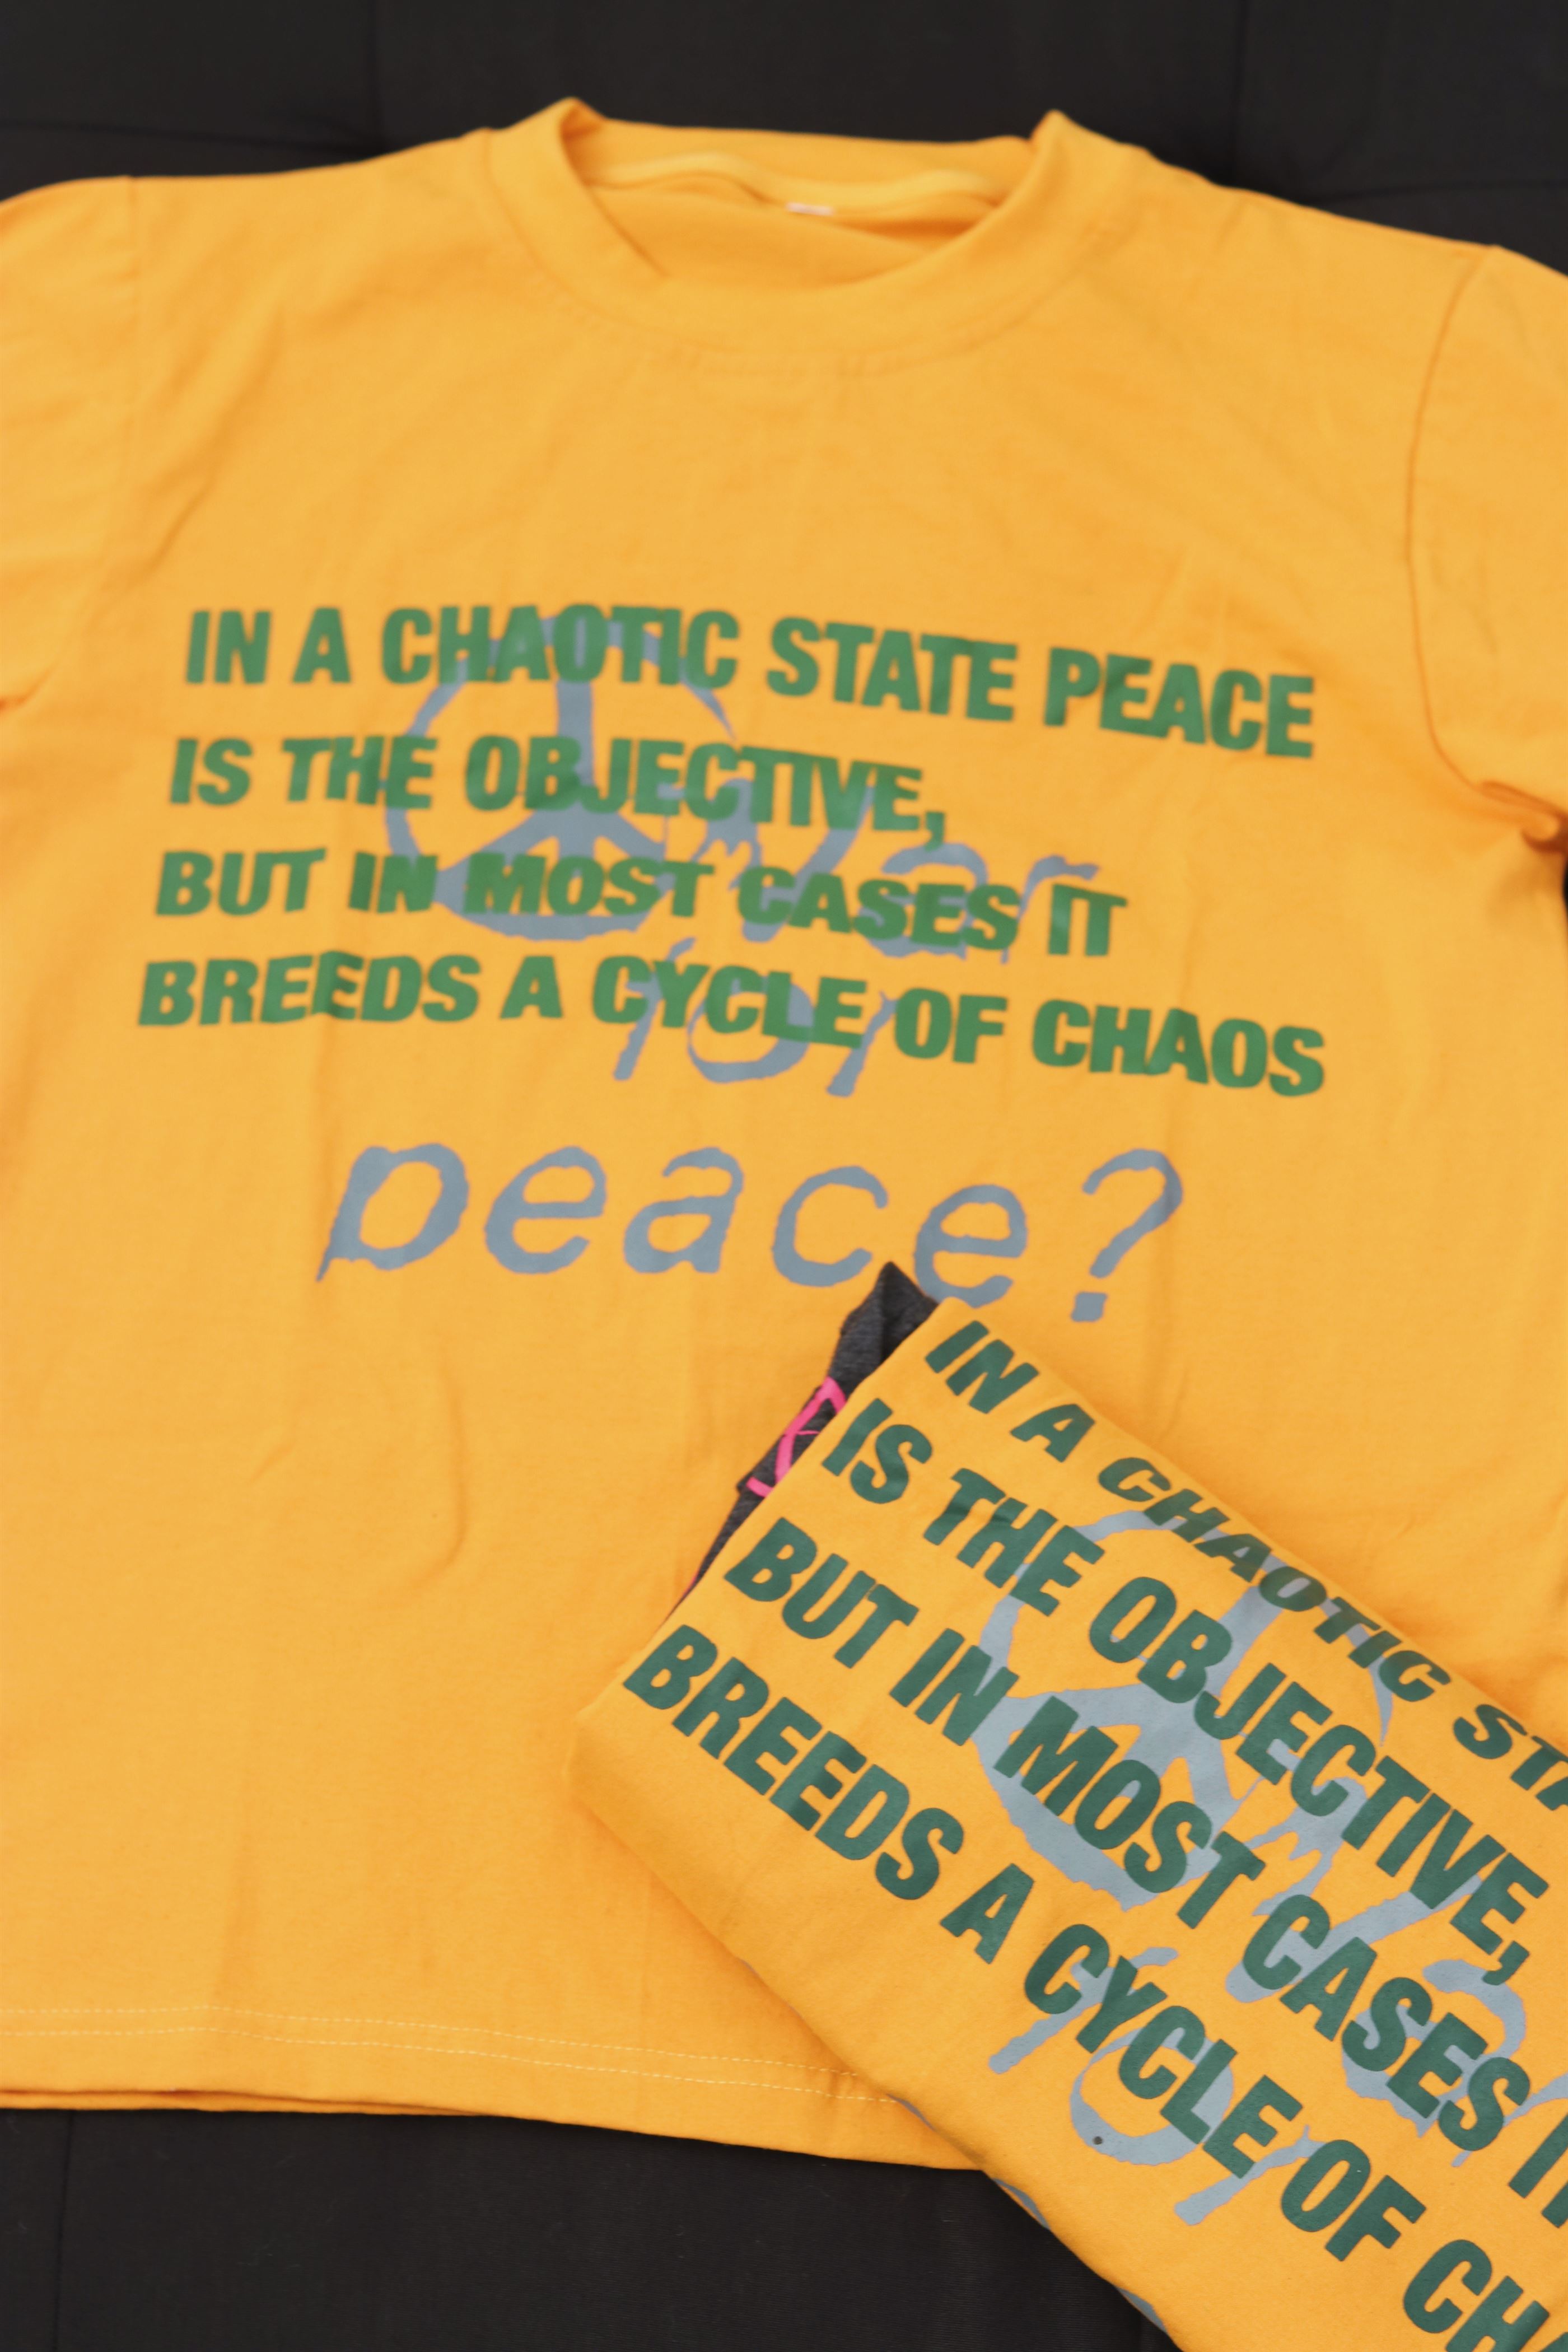 The War for Peace shirt displayed.